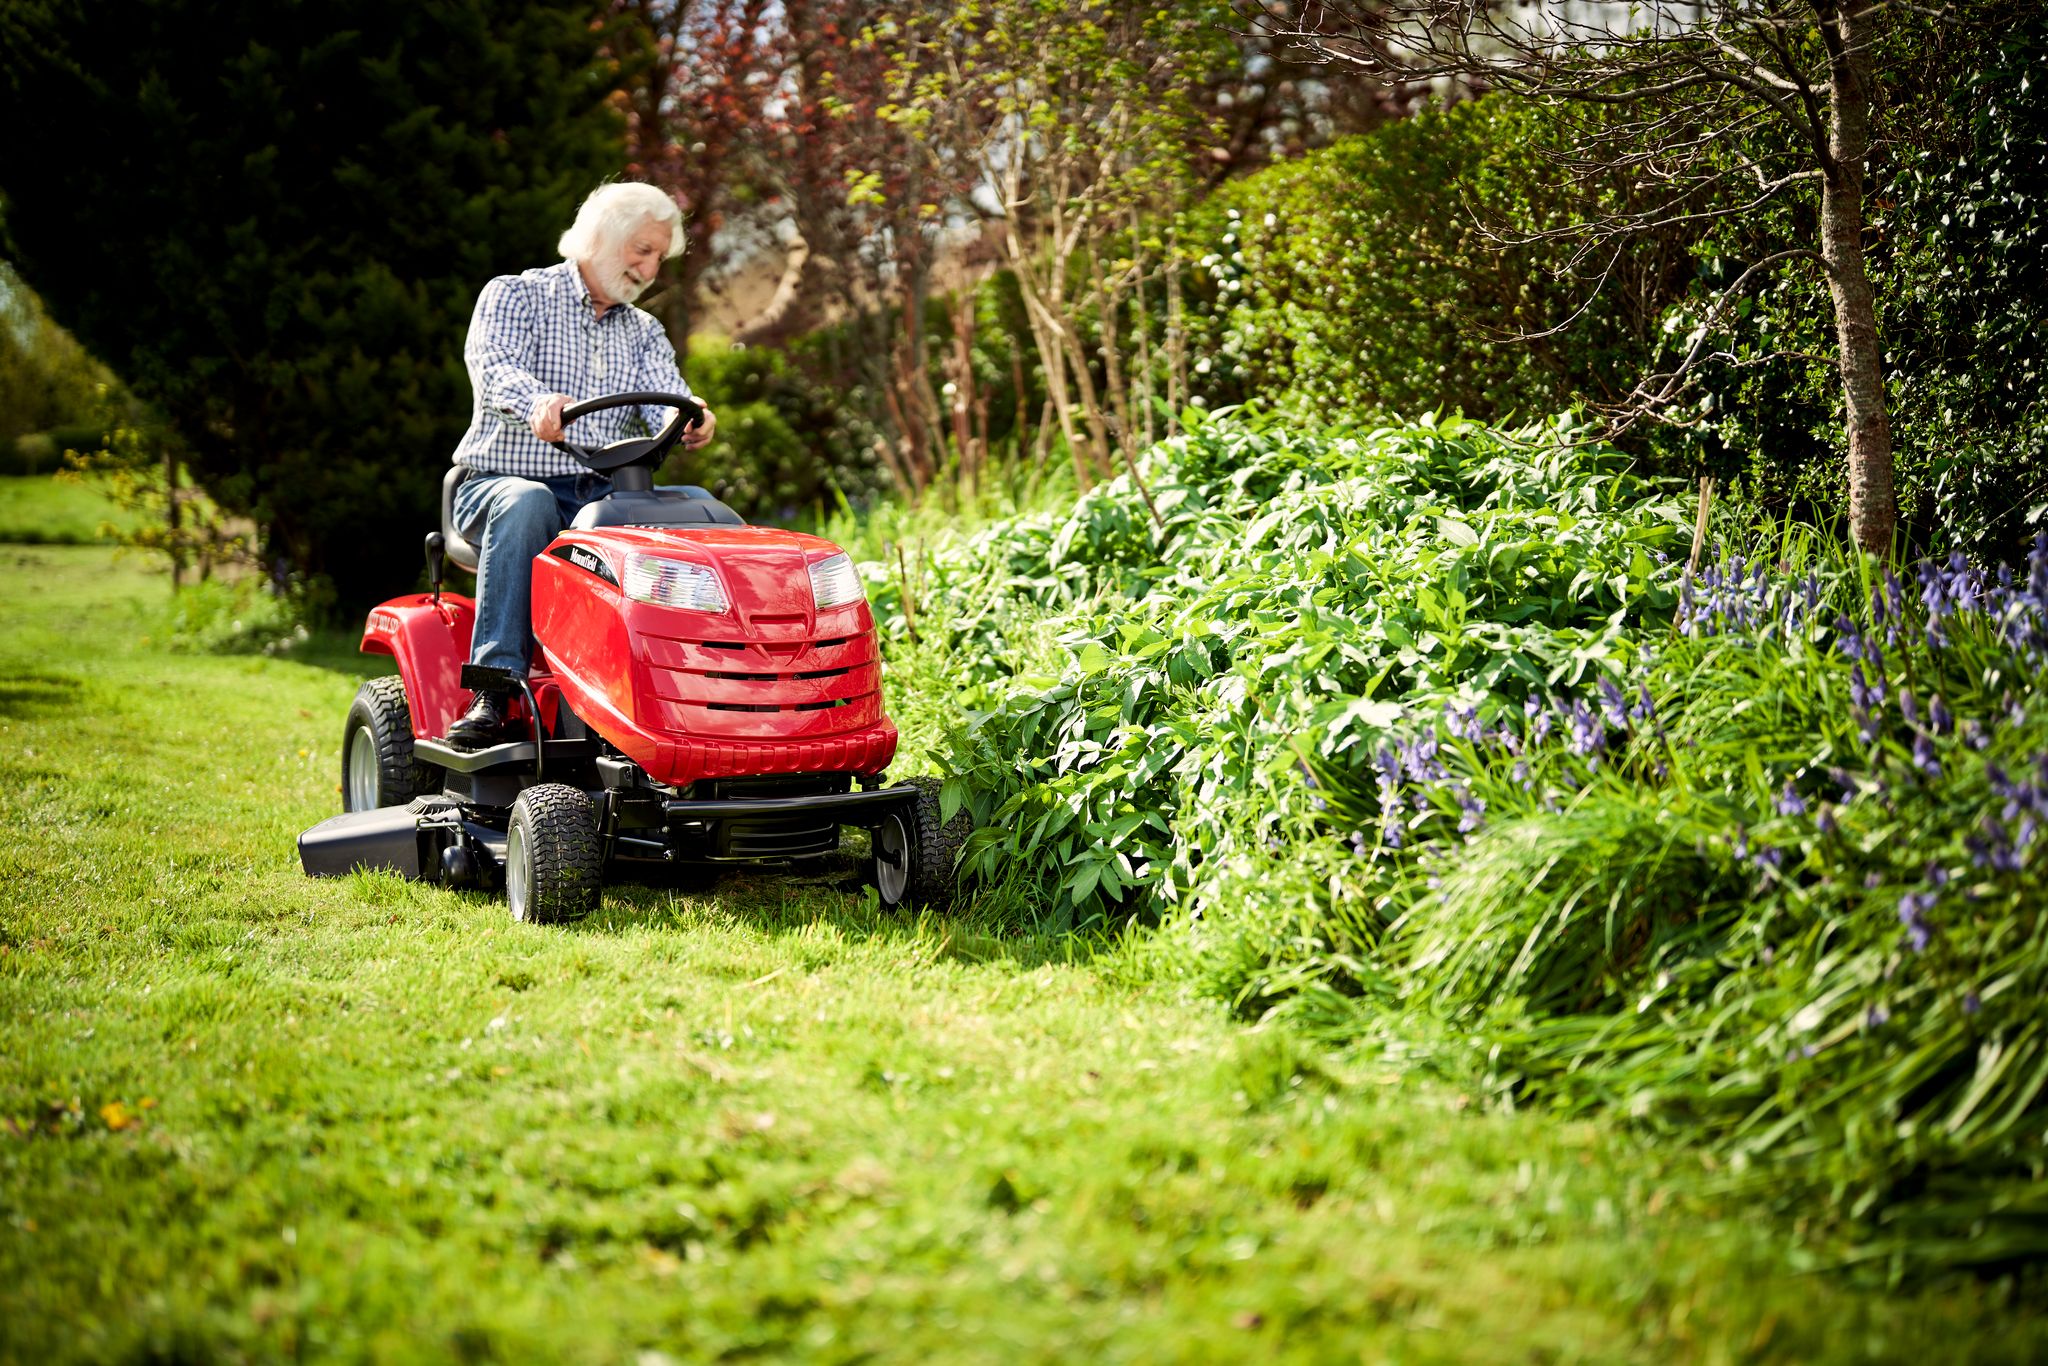 Ride on lawn mower hire